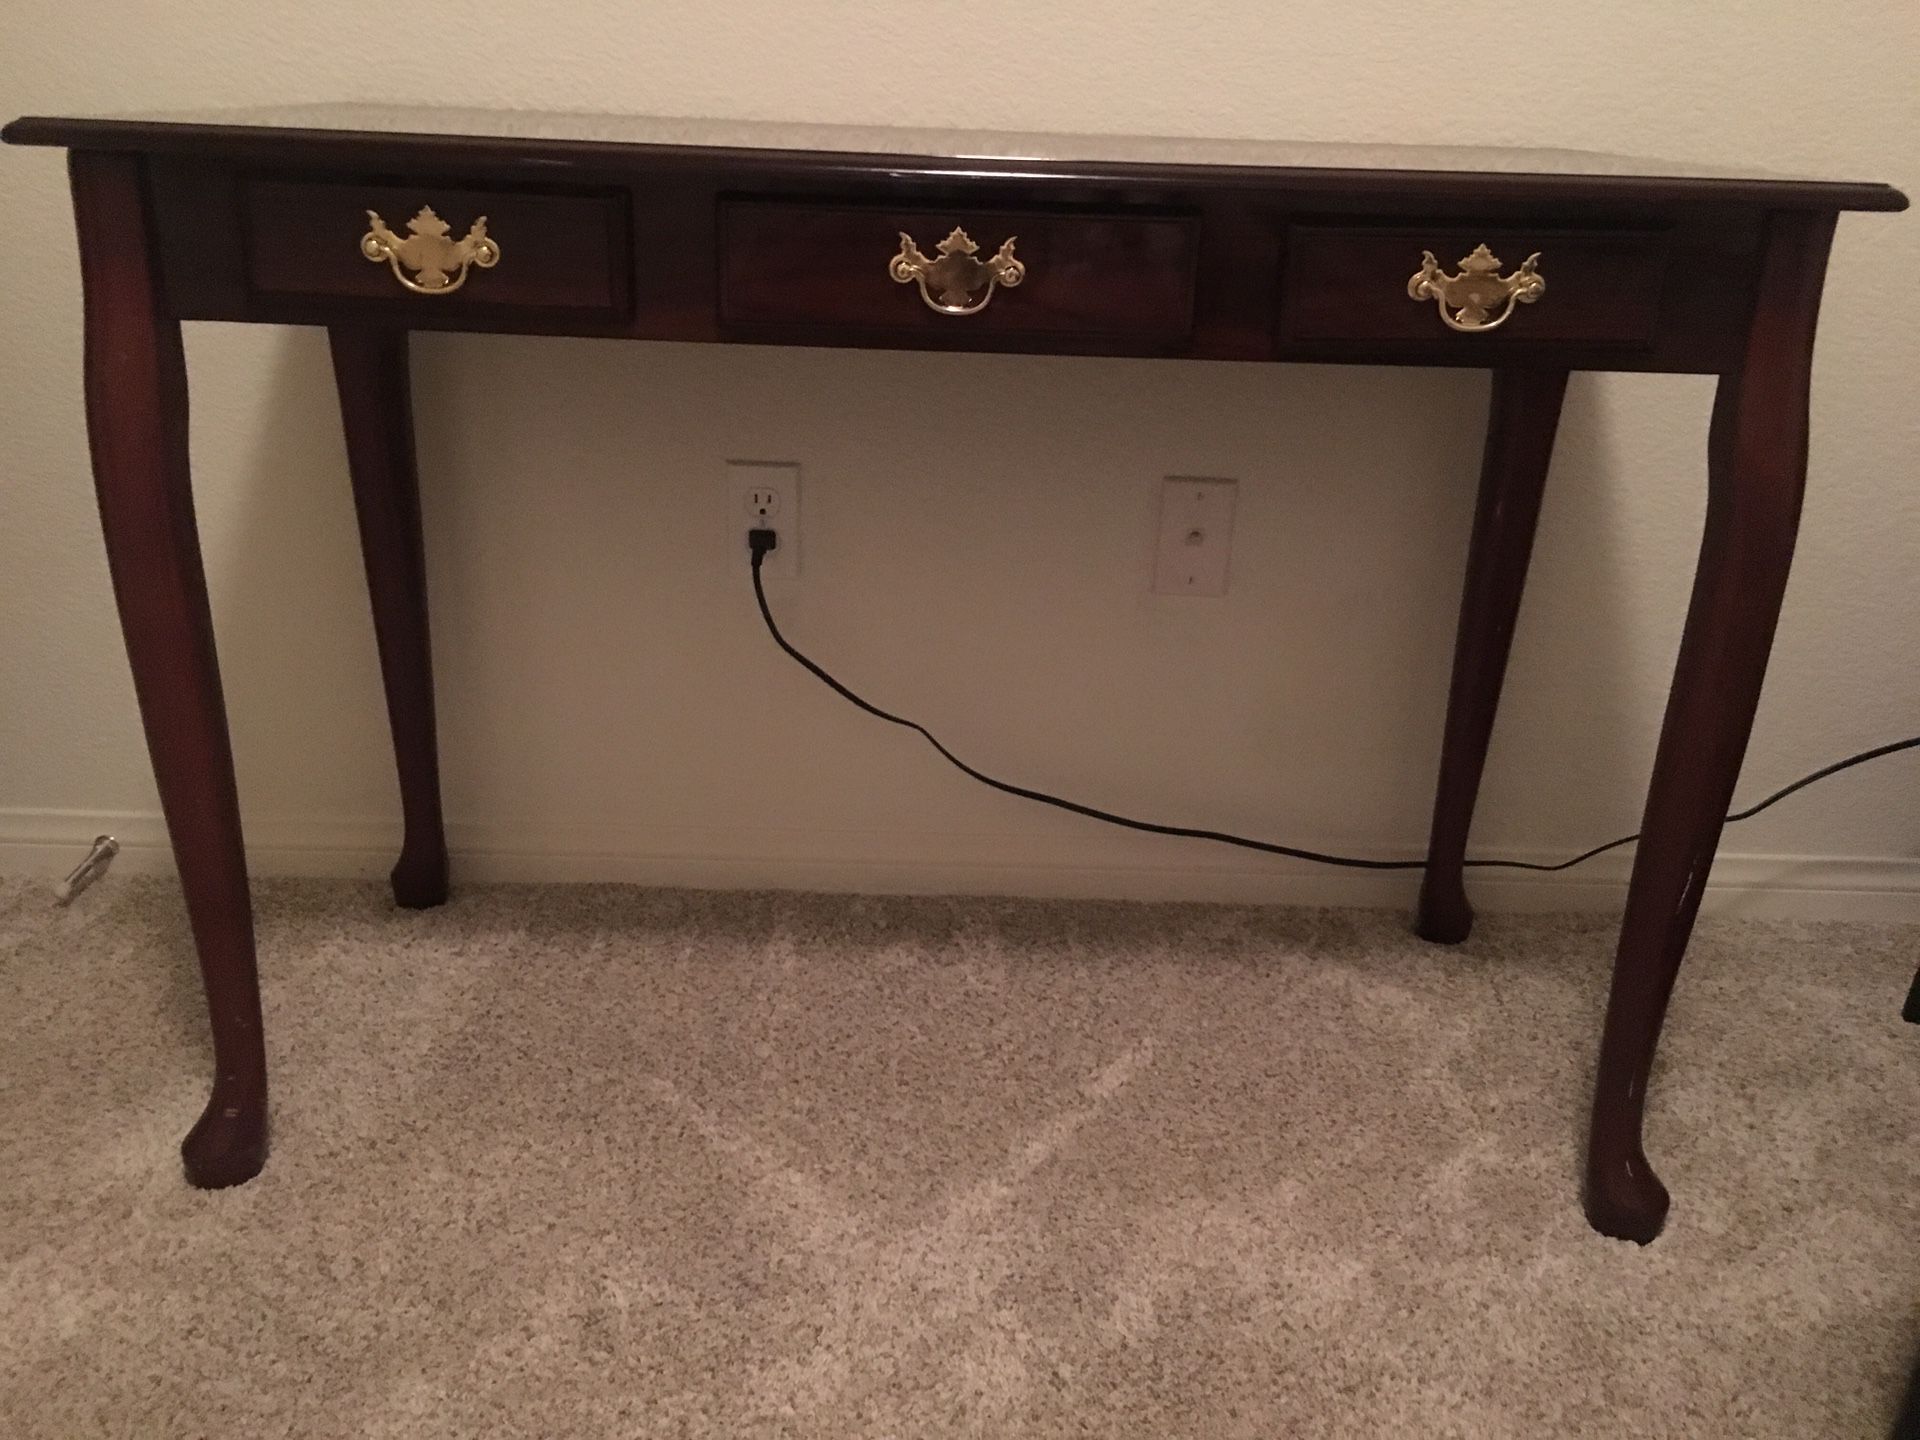 Entry table or desk